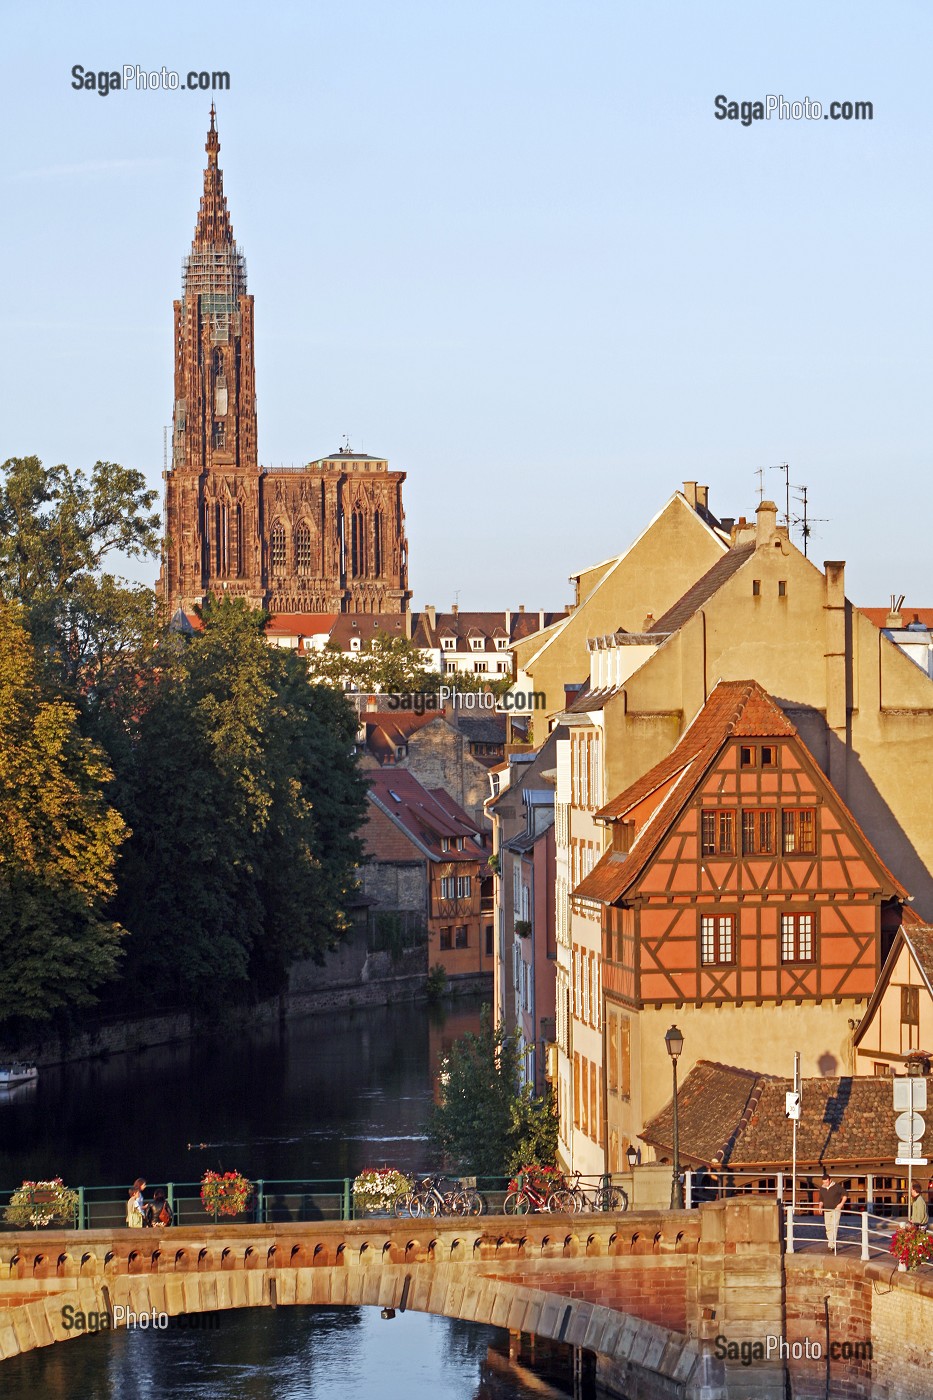 PONTS COUVERTS ET CATHEDRALE, STRASBOURG, BAS-RHIN (67), ALSACE, FRANCE 